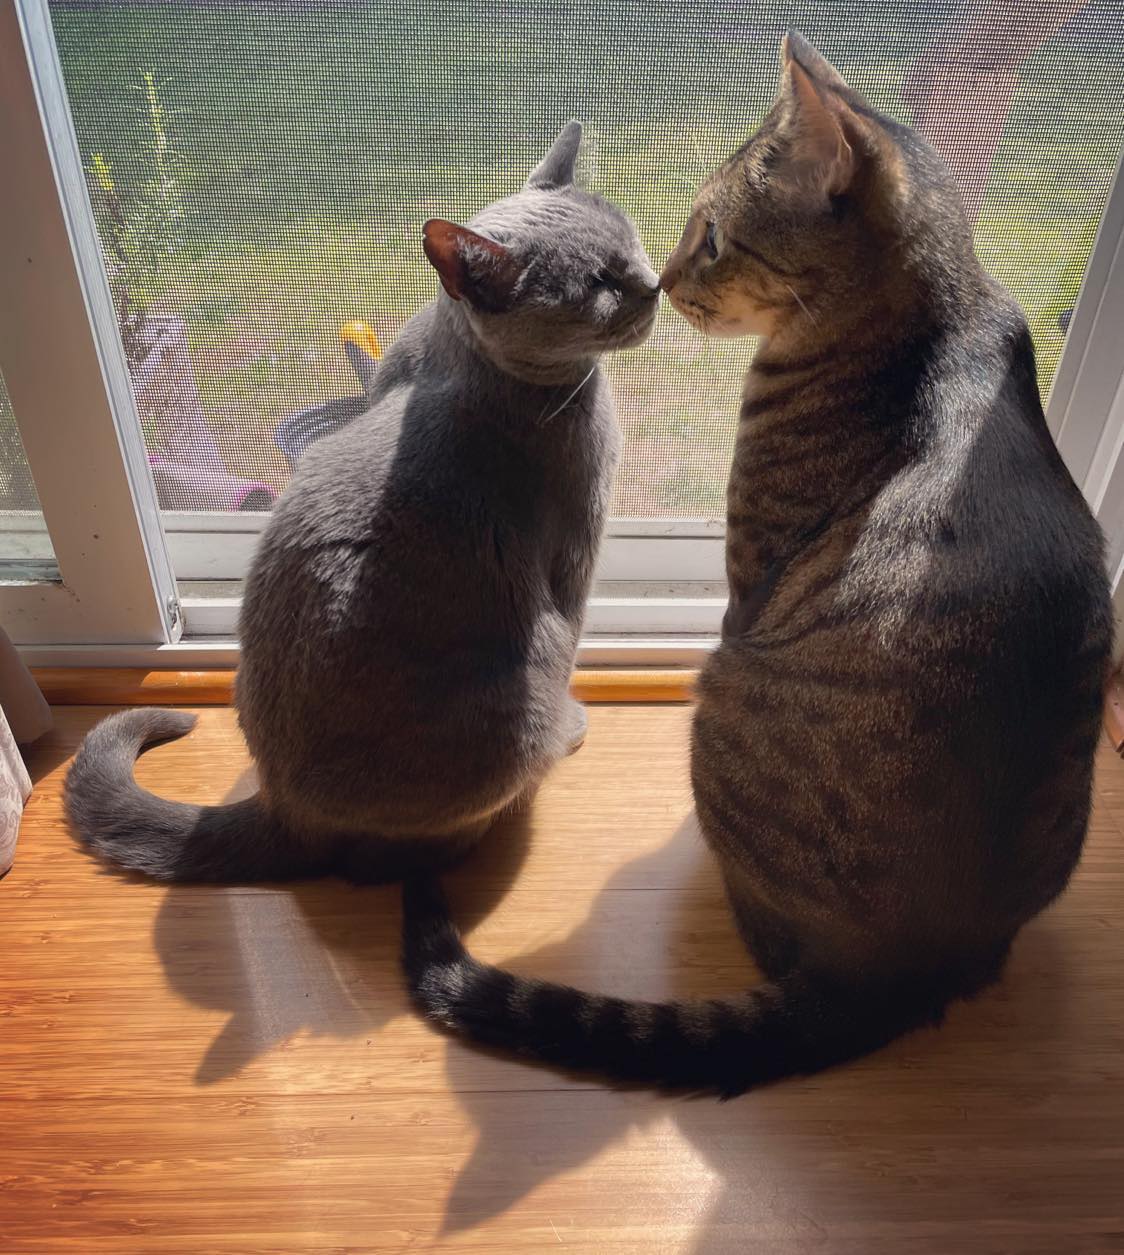 Two cats sitting in front of an a screen door, touching noses